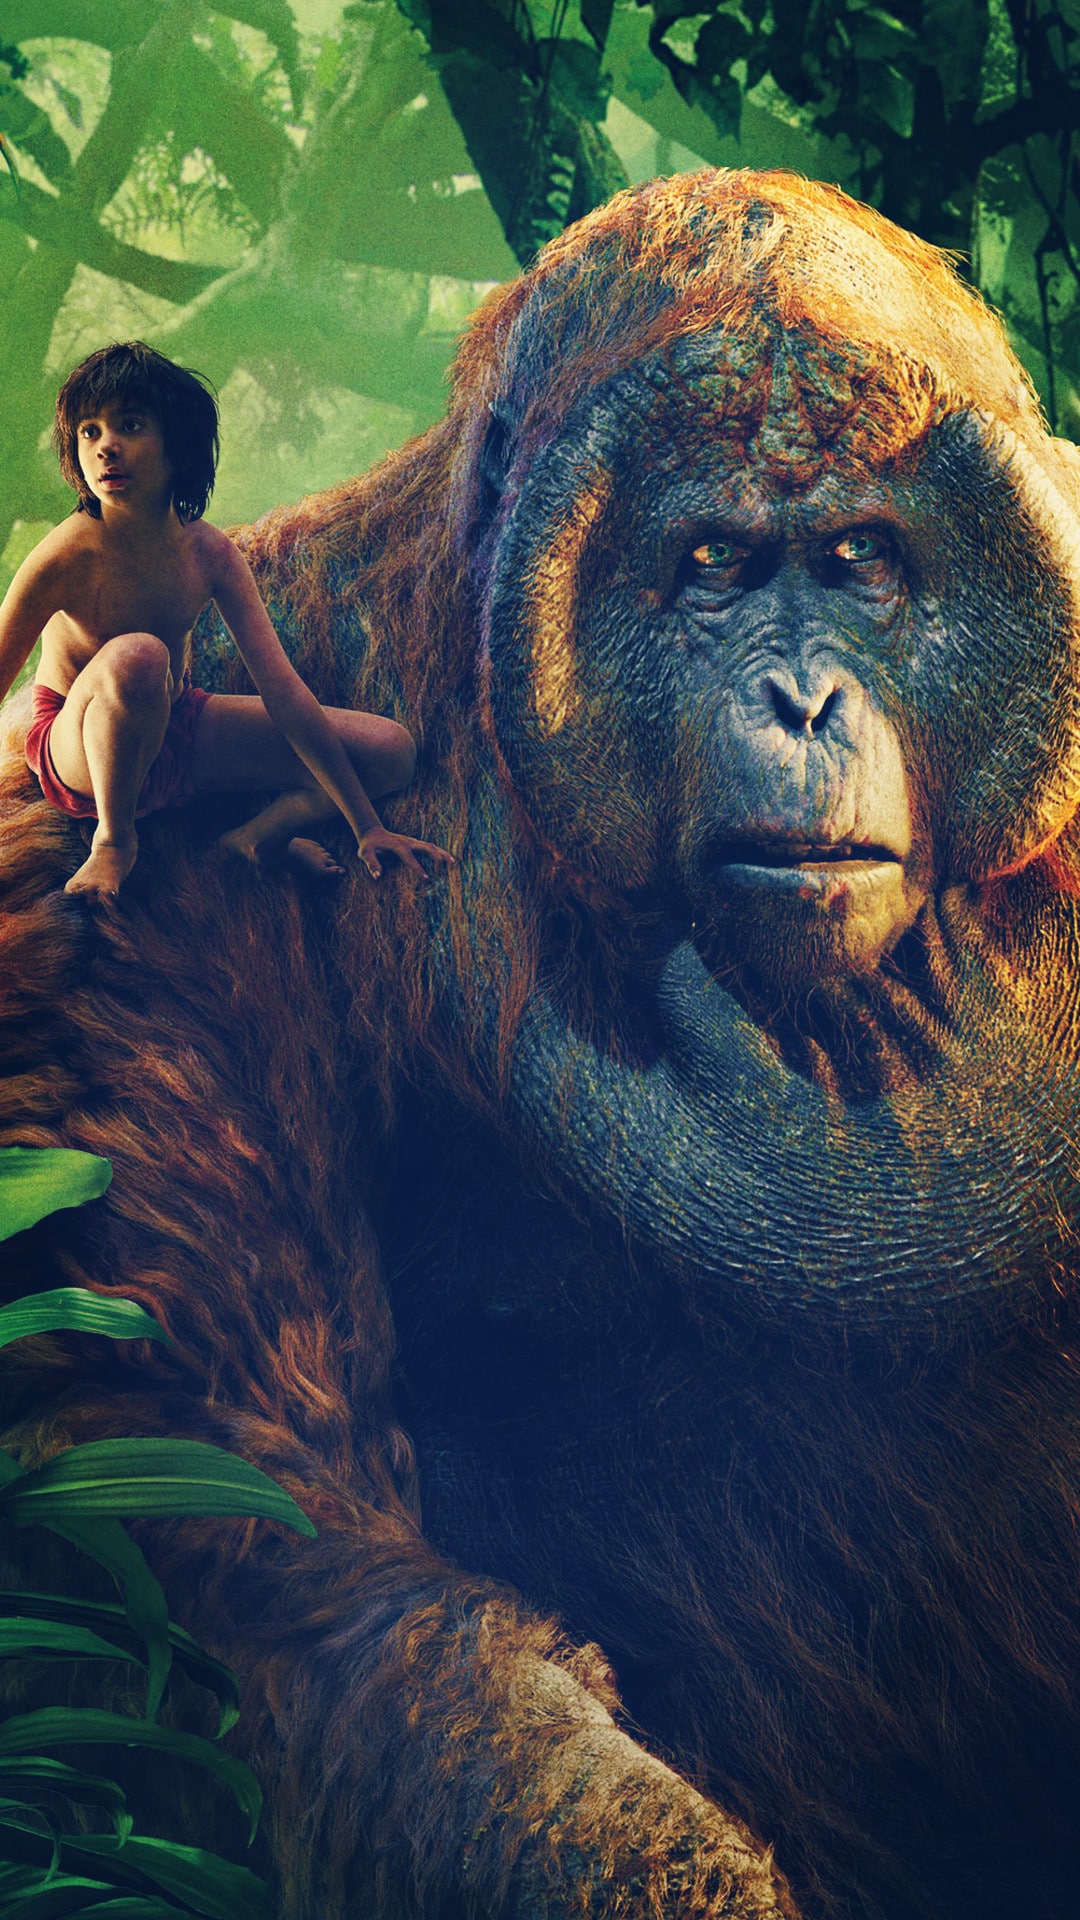 The Jungle Book 2016 Movie Wallpapers for iPhone - Apple Lives